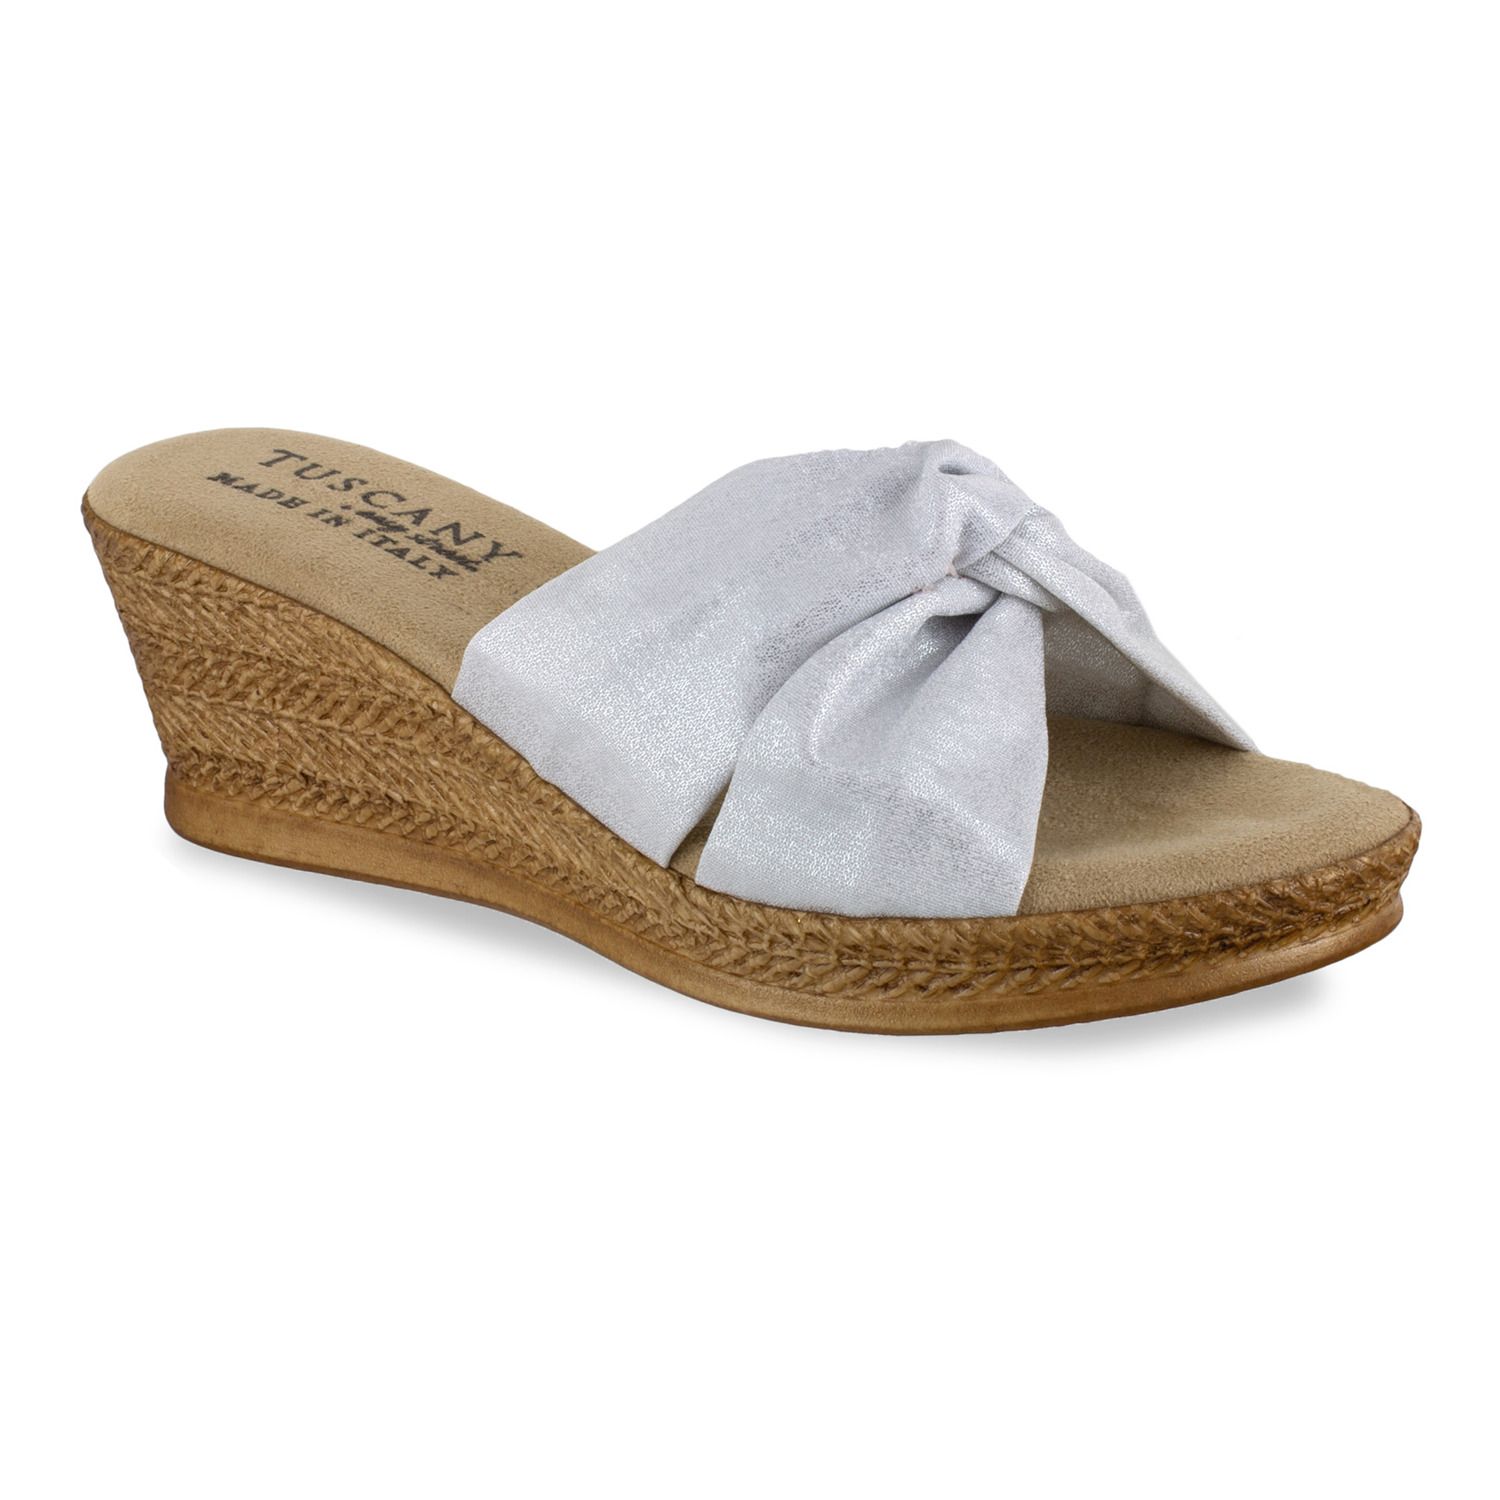 Image for Easy Street Dinah Women's Wedge Sandals at Kohl's.